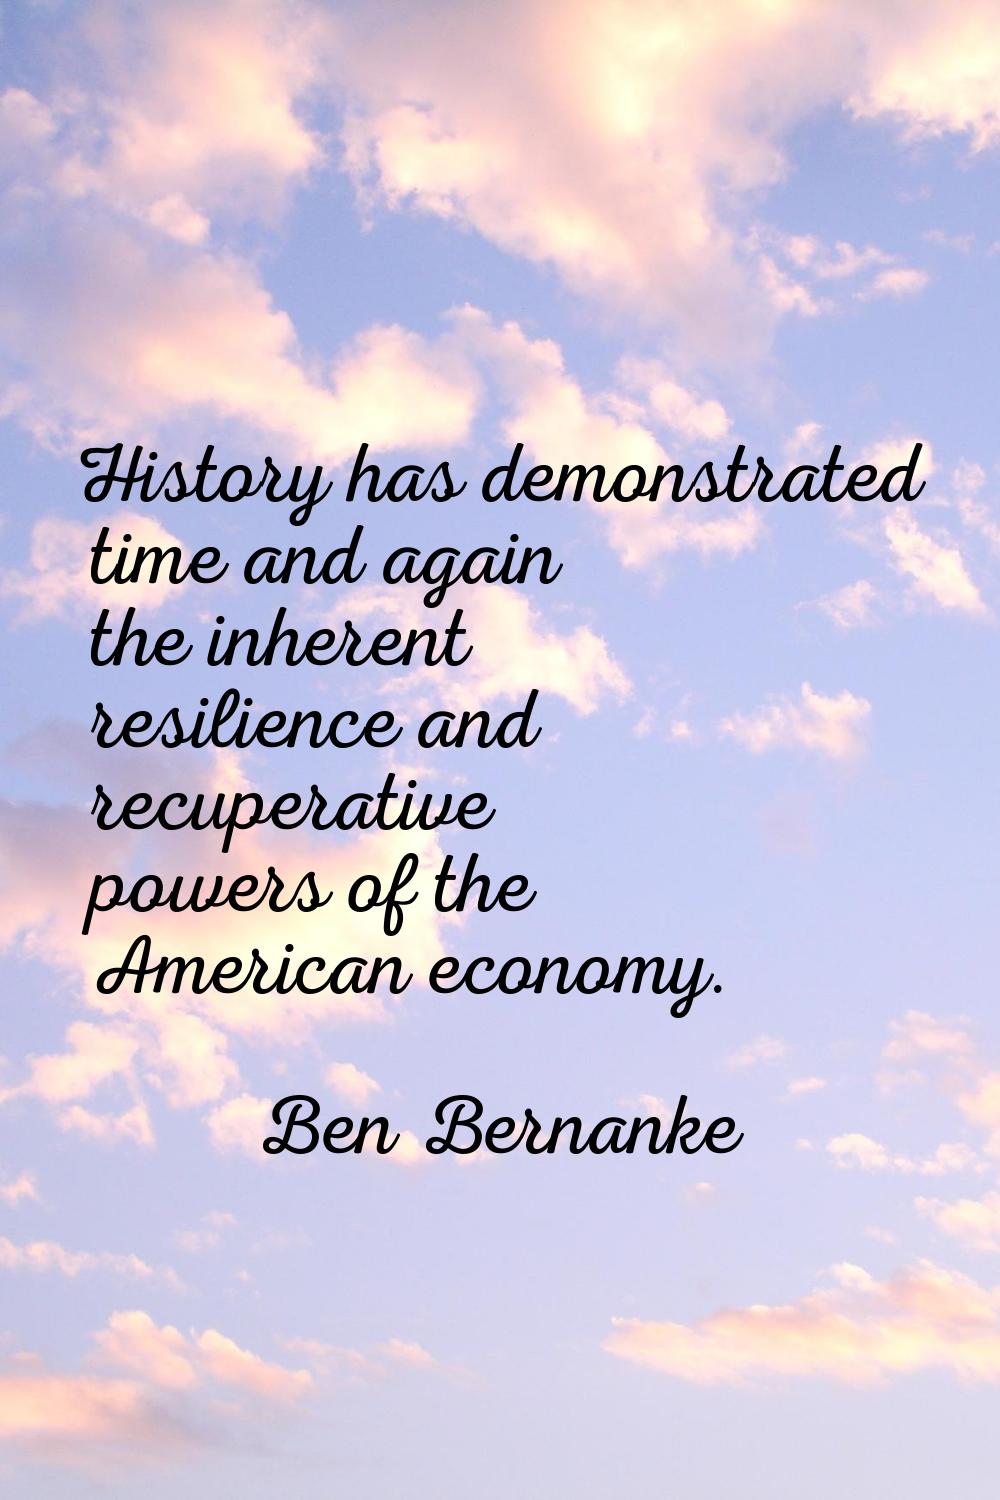 History has demonstrated time and again the inherent resilience and recuperative powers of the Amer